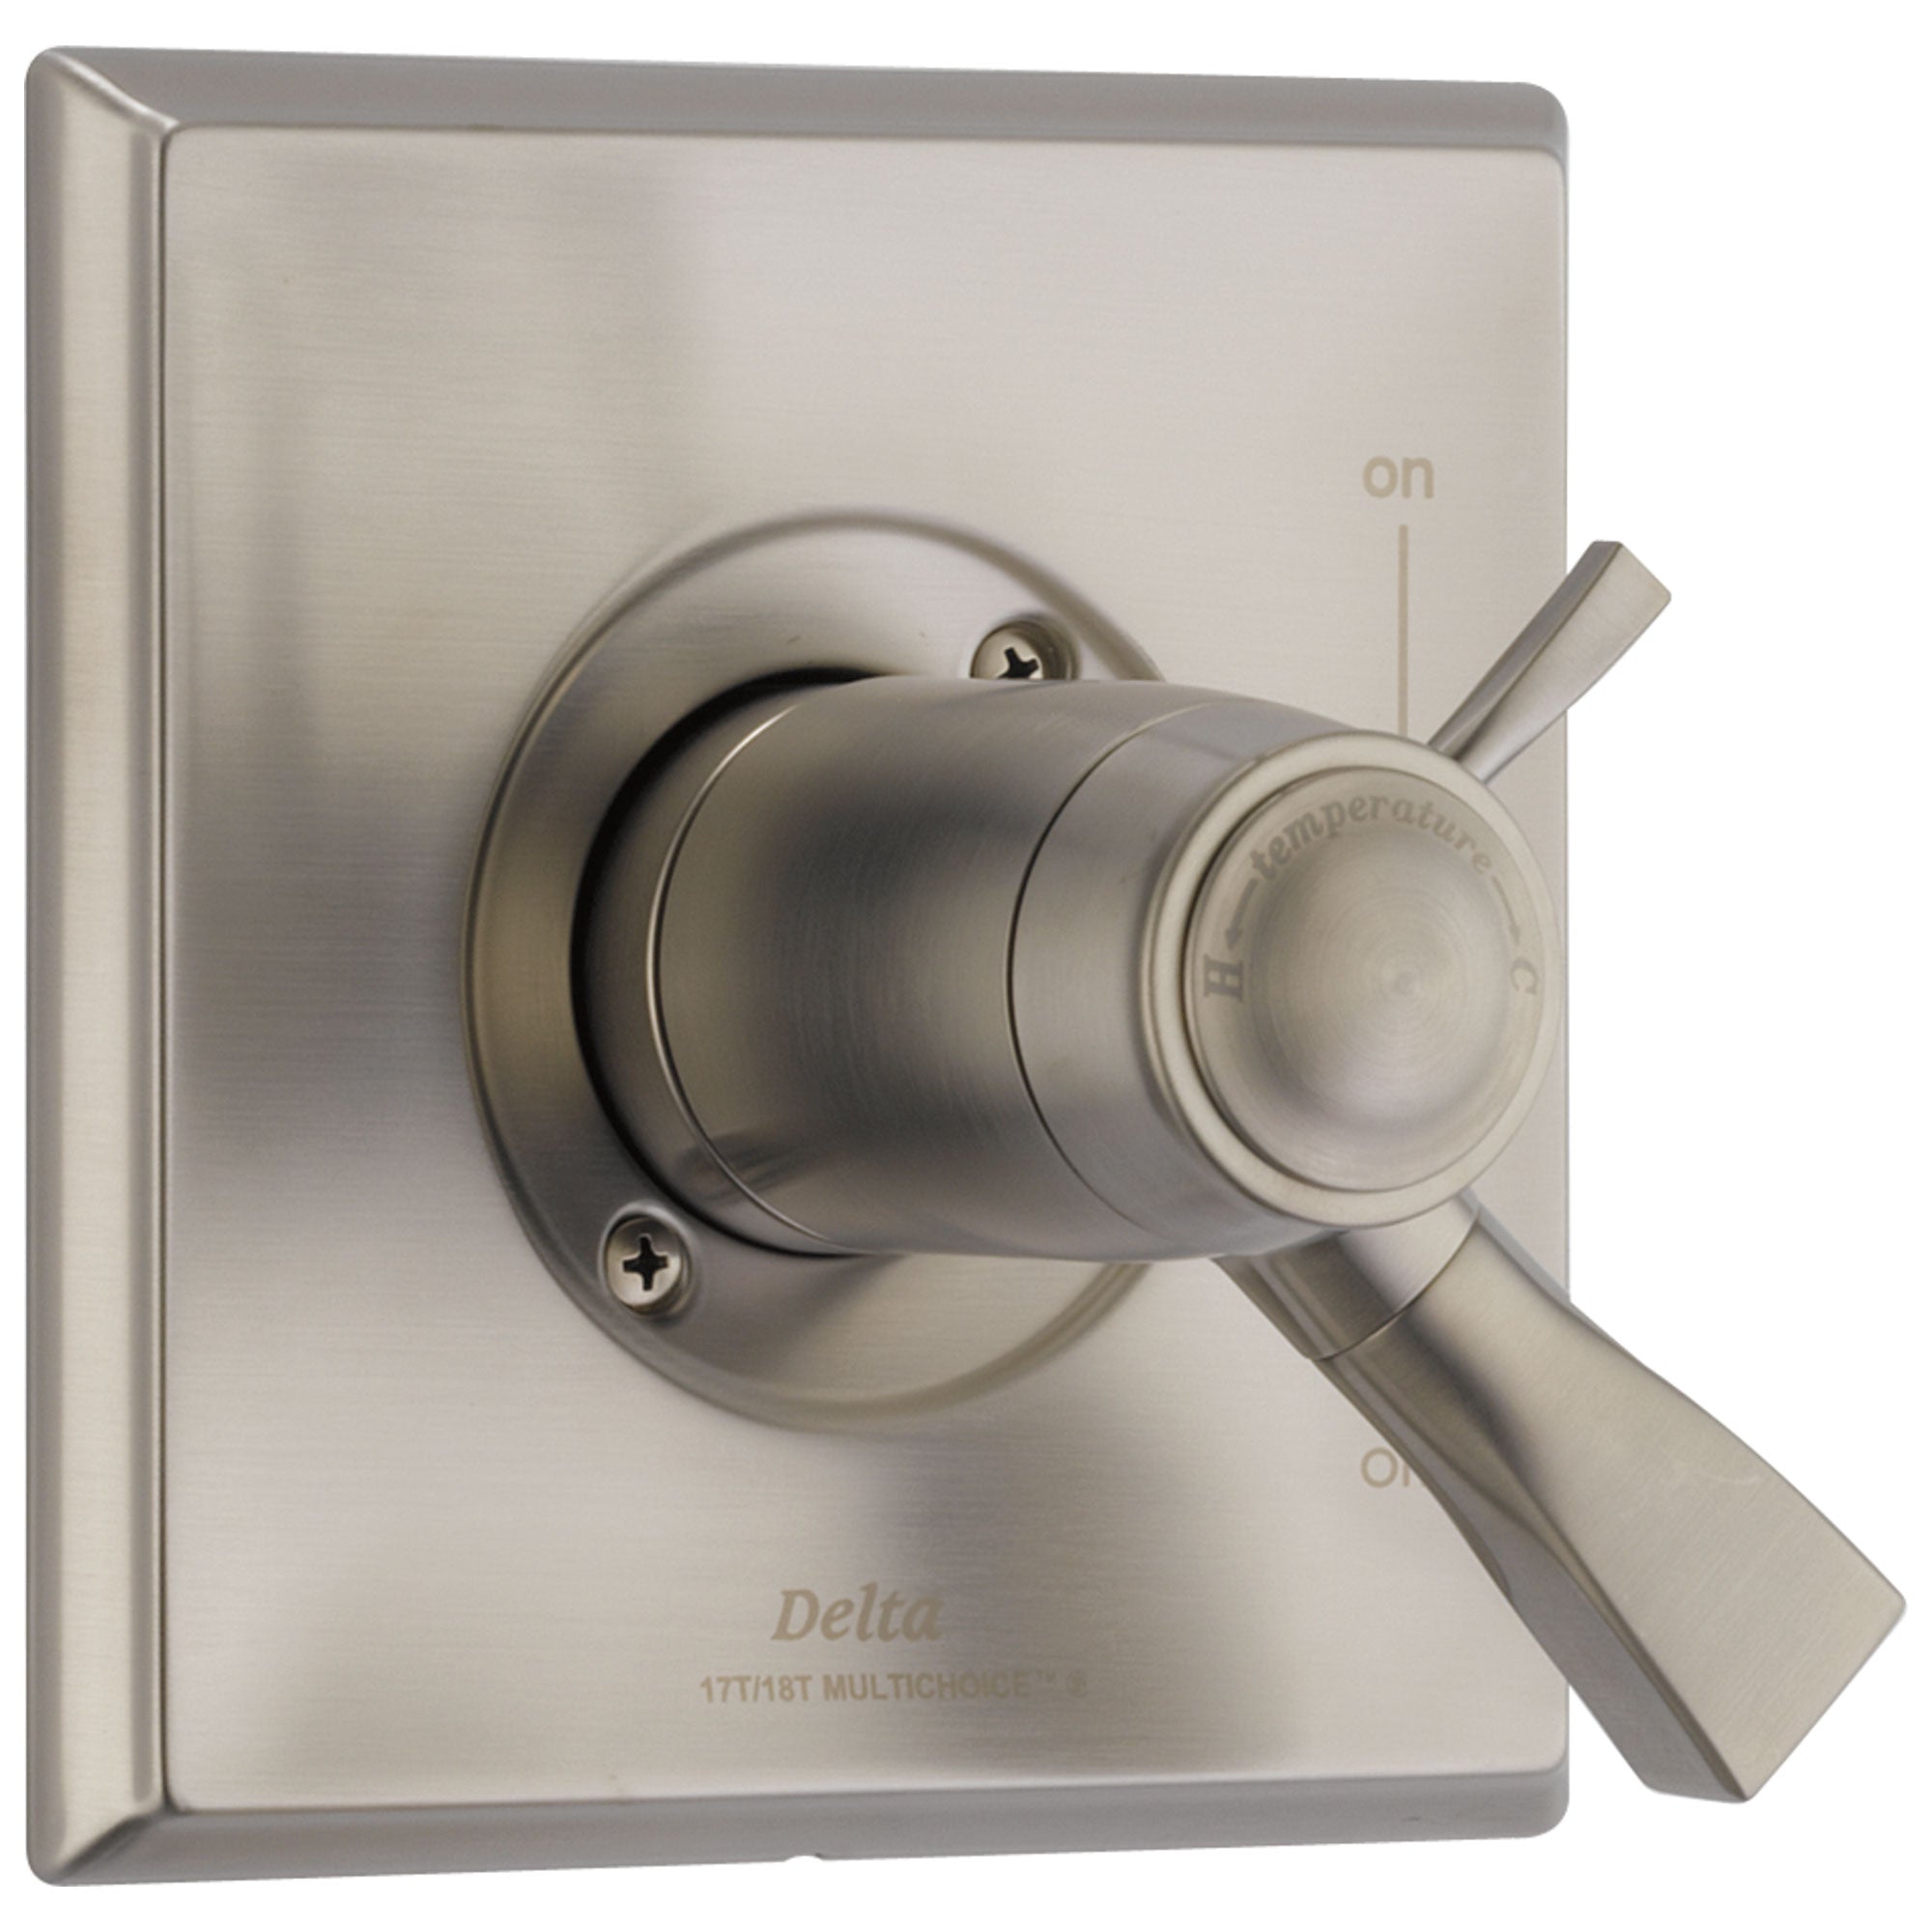 Delta Dryden Collection Stainless Steel Finish Thermostatic Dual Temperature and Pressure Control Handle Valve Only Trim (Requires Valve) DT17T051SP